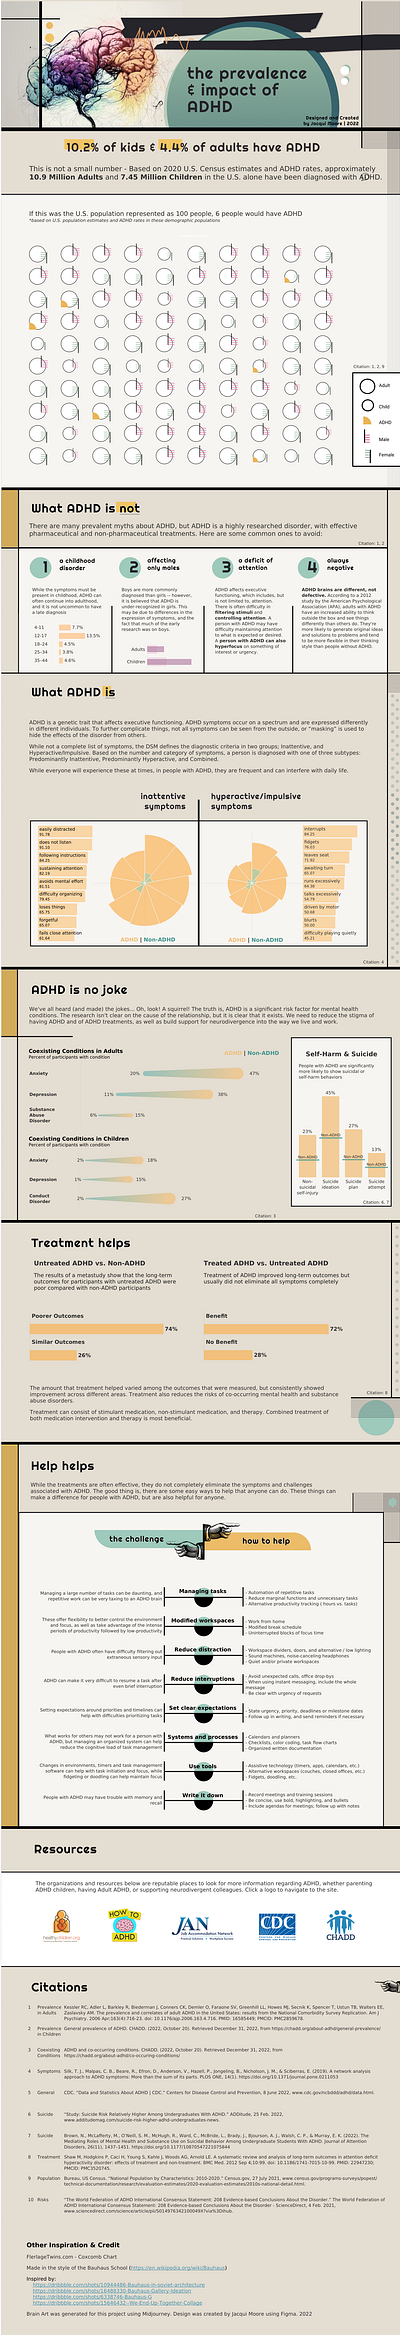 The Prevalence and Impact of ADHD dashboard data dataviz infographic